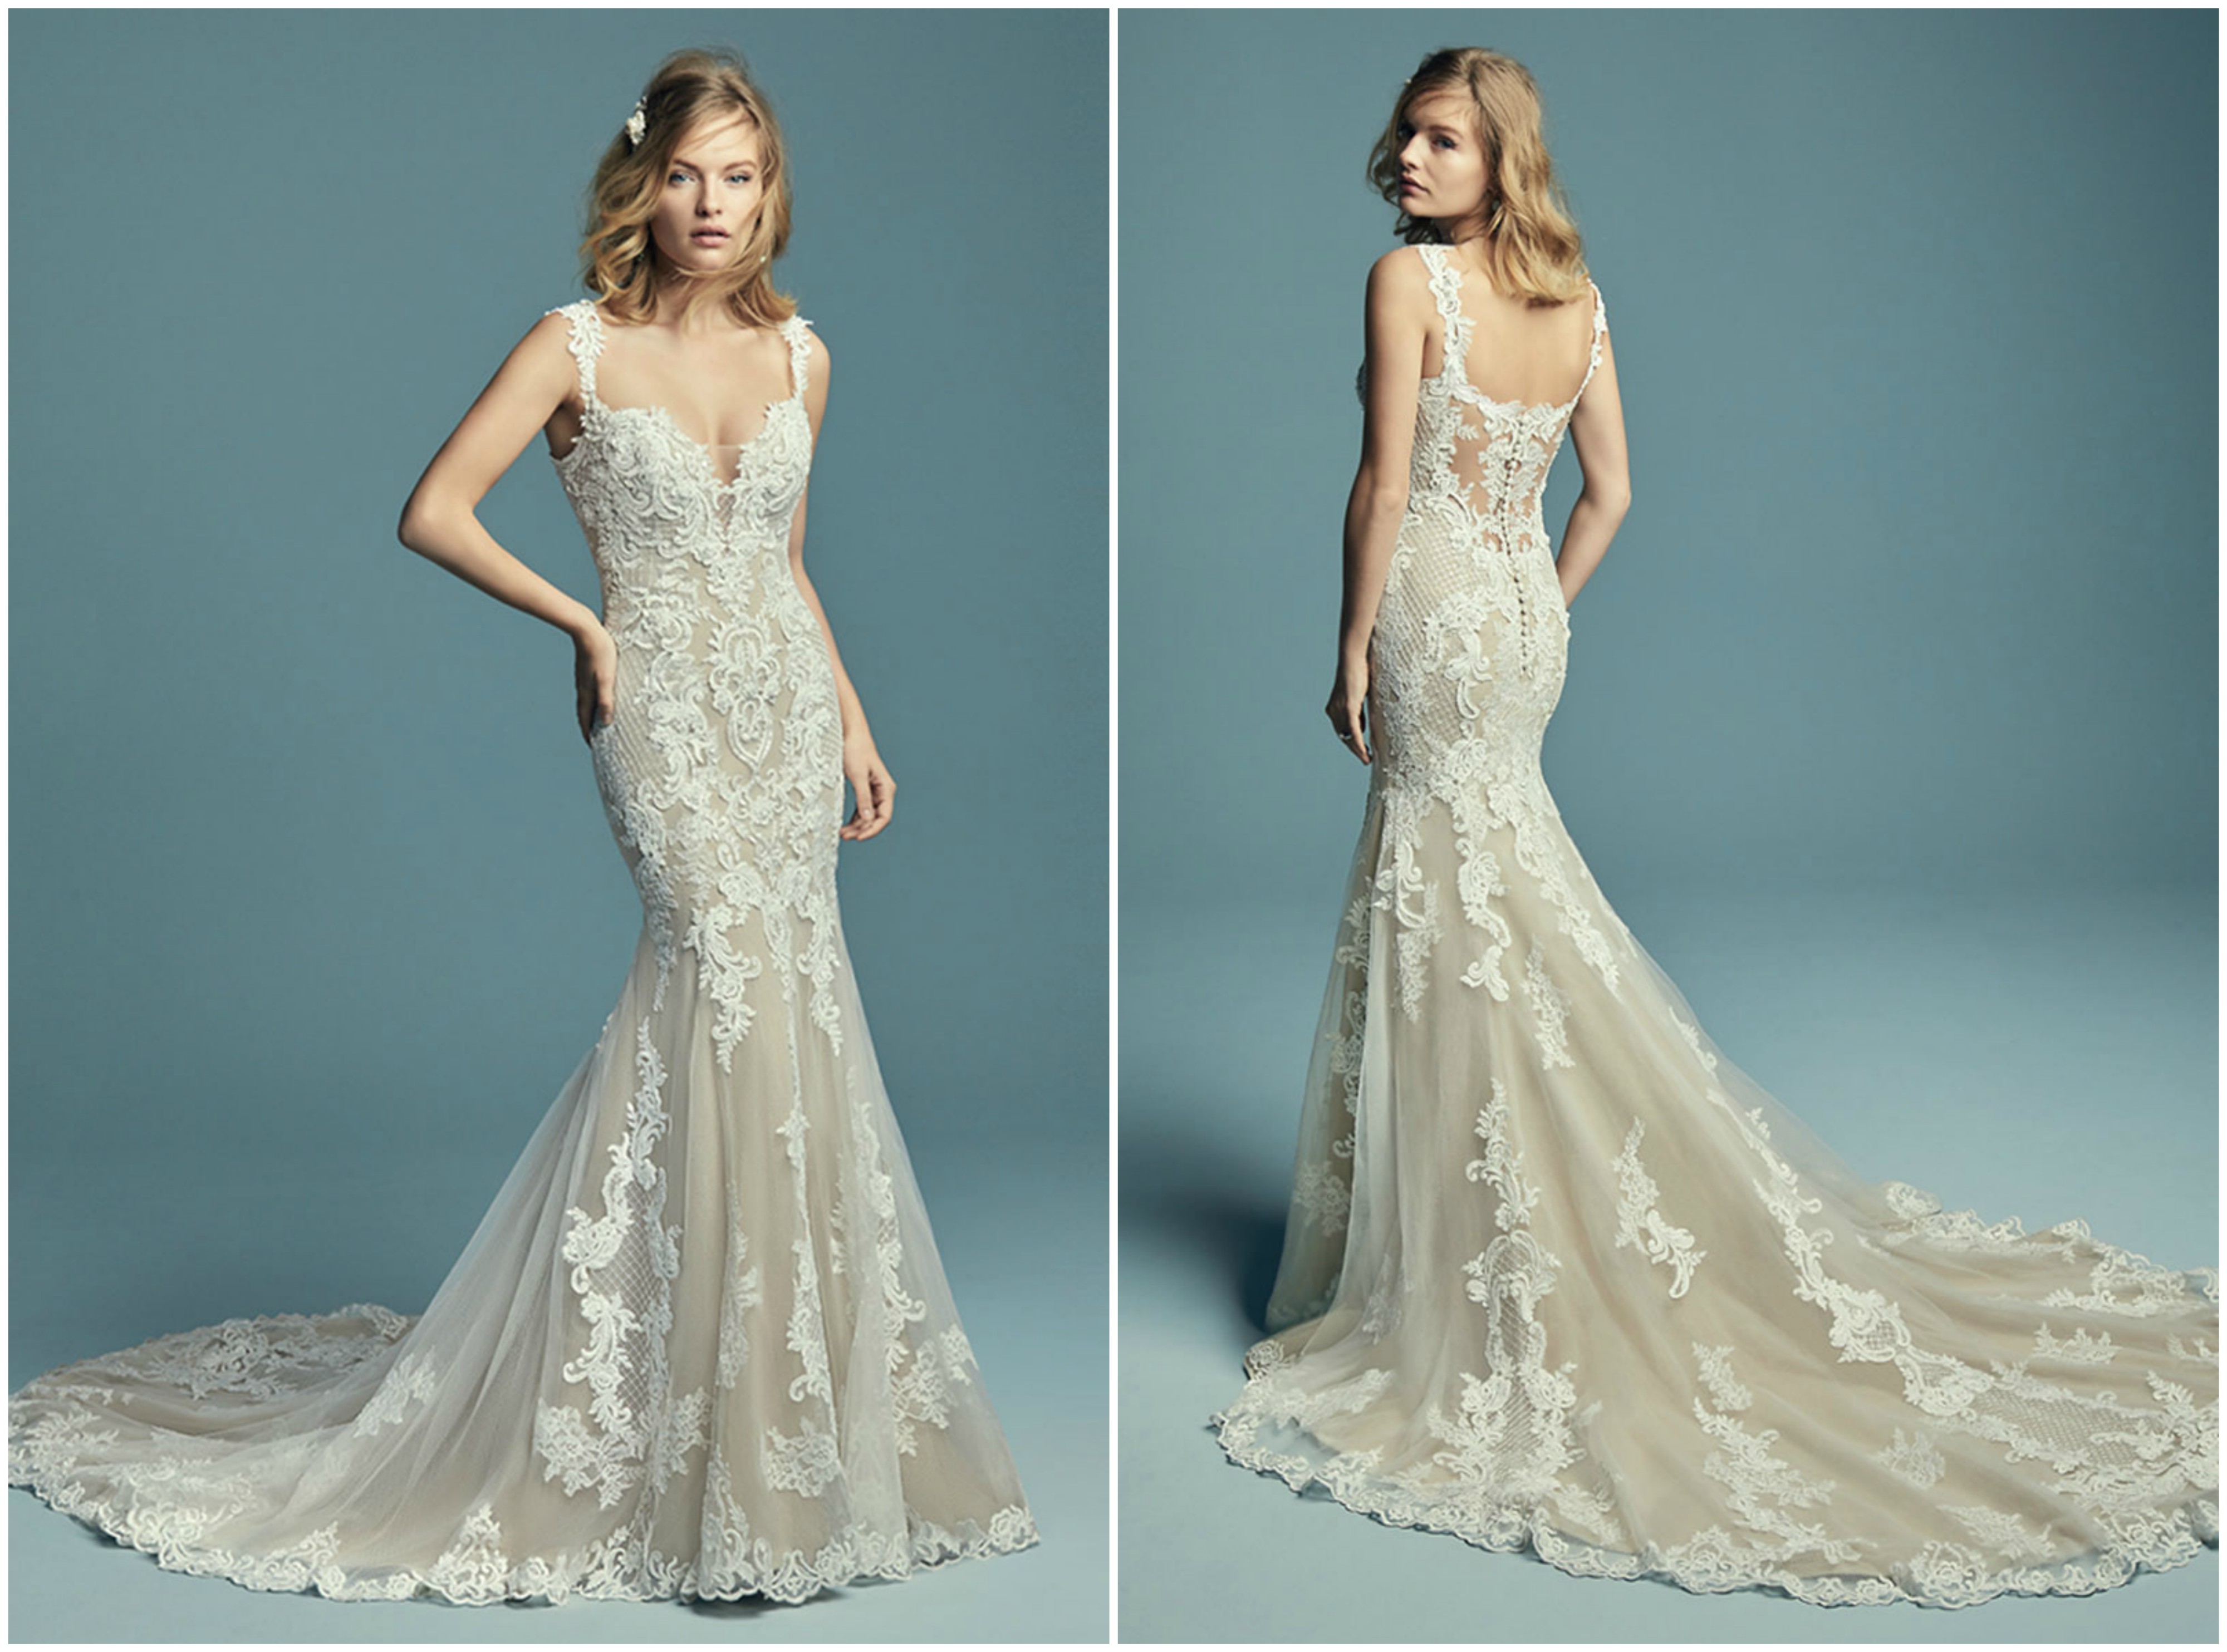 <a href="https://www.maggiesottero.com/maggie-sottero/abbie/11450" target="_blank">Maggie Sottero</a>